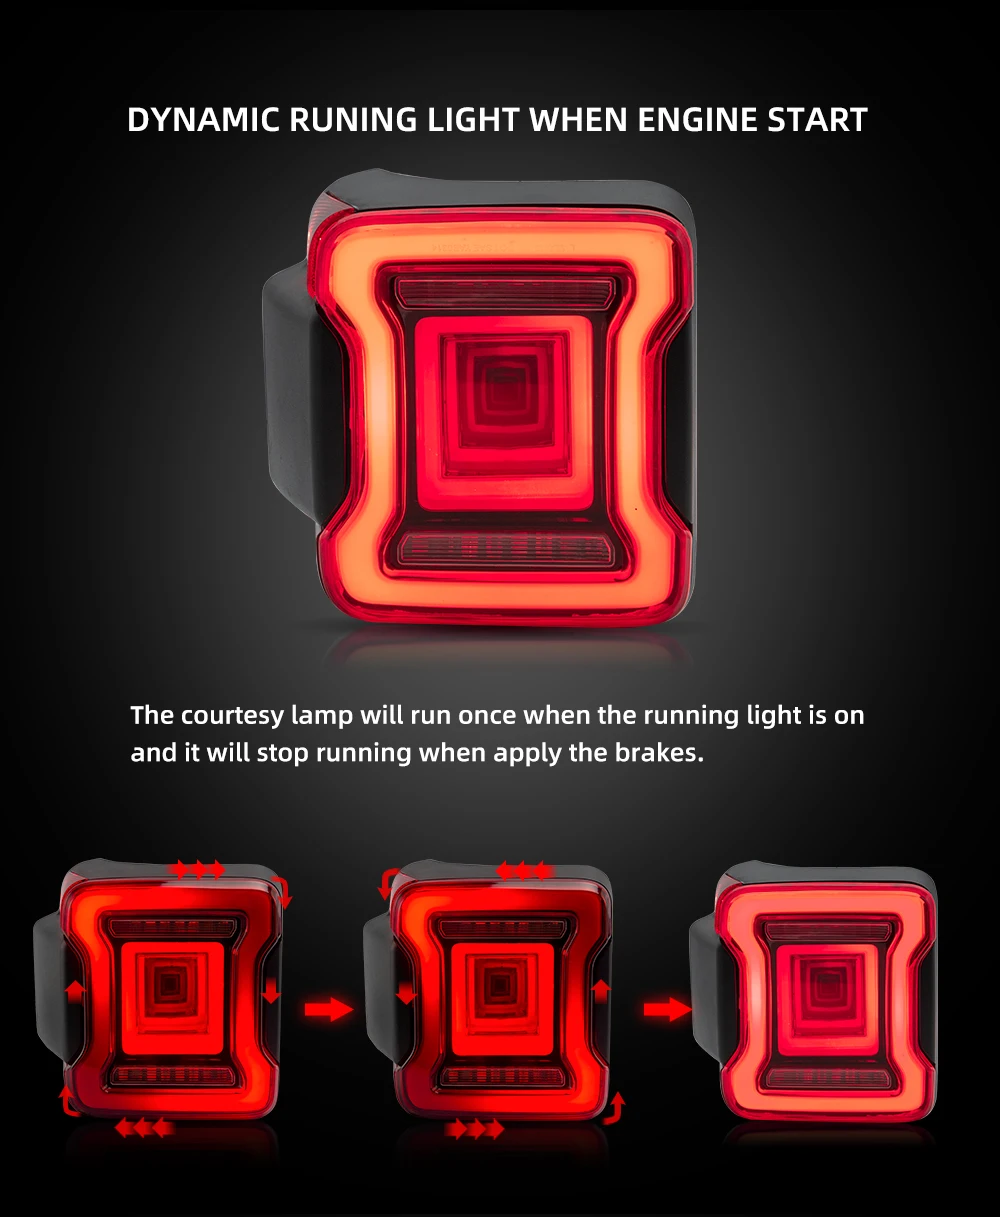 Vland Factory Car Accessories Tail Lamp For Wrangler 2018-UP Full LED Tail Light Turn Signal With Sequenial Indicator